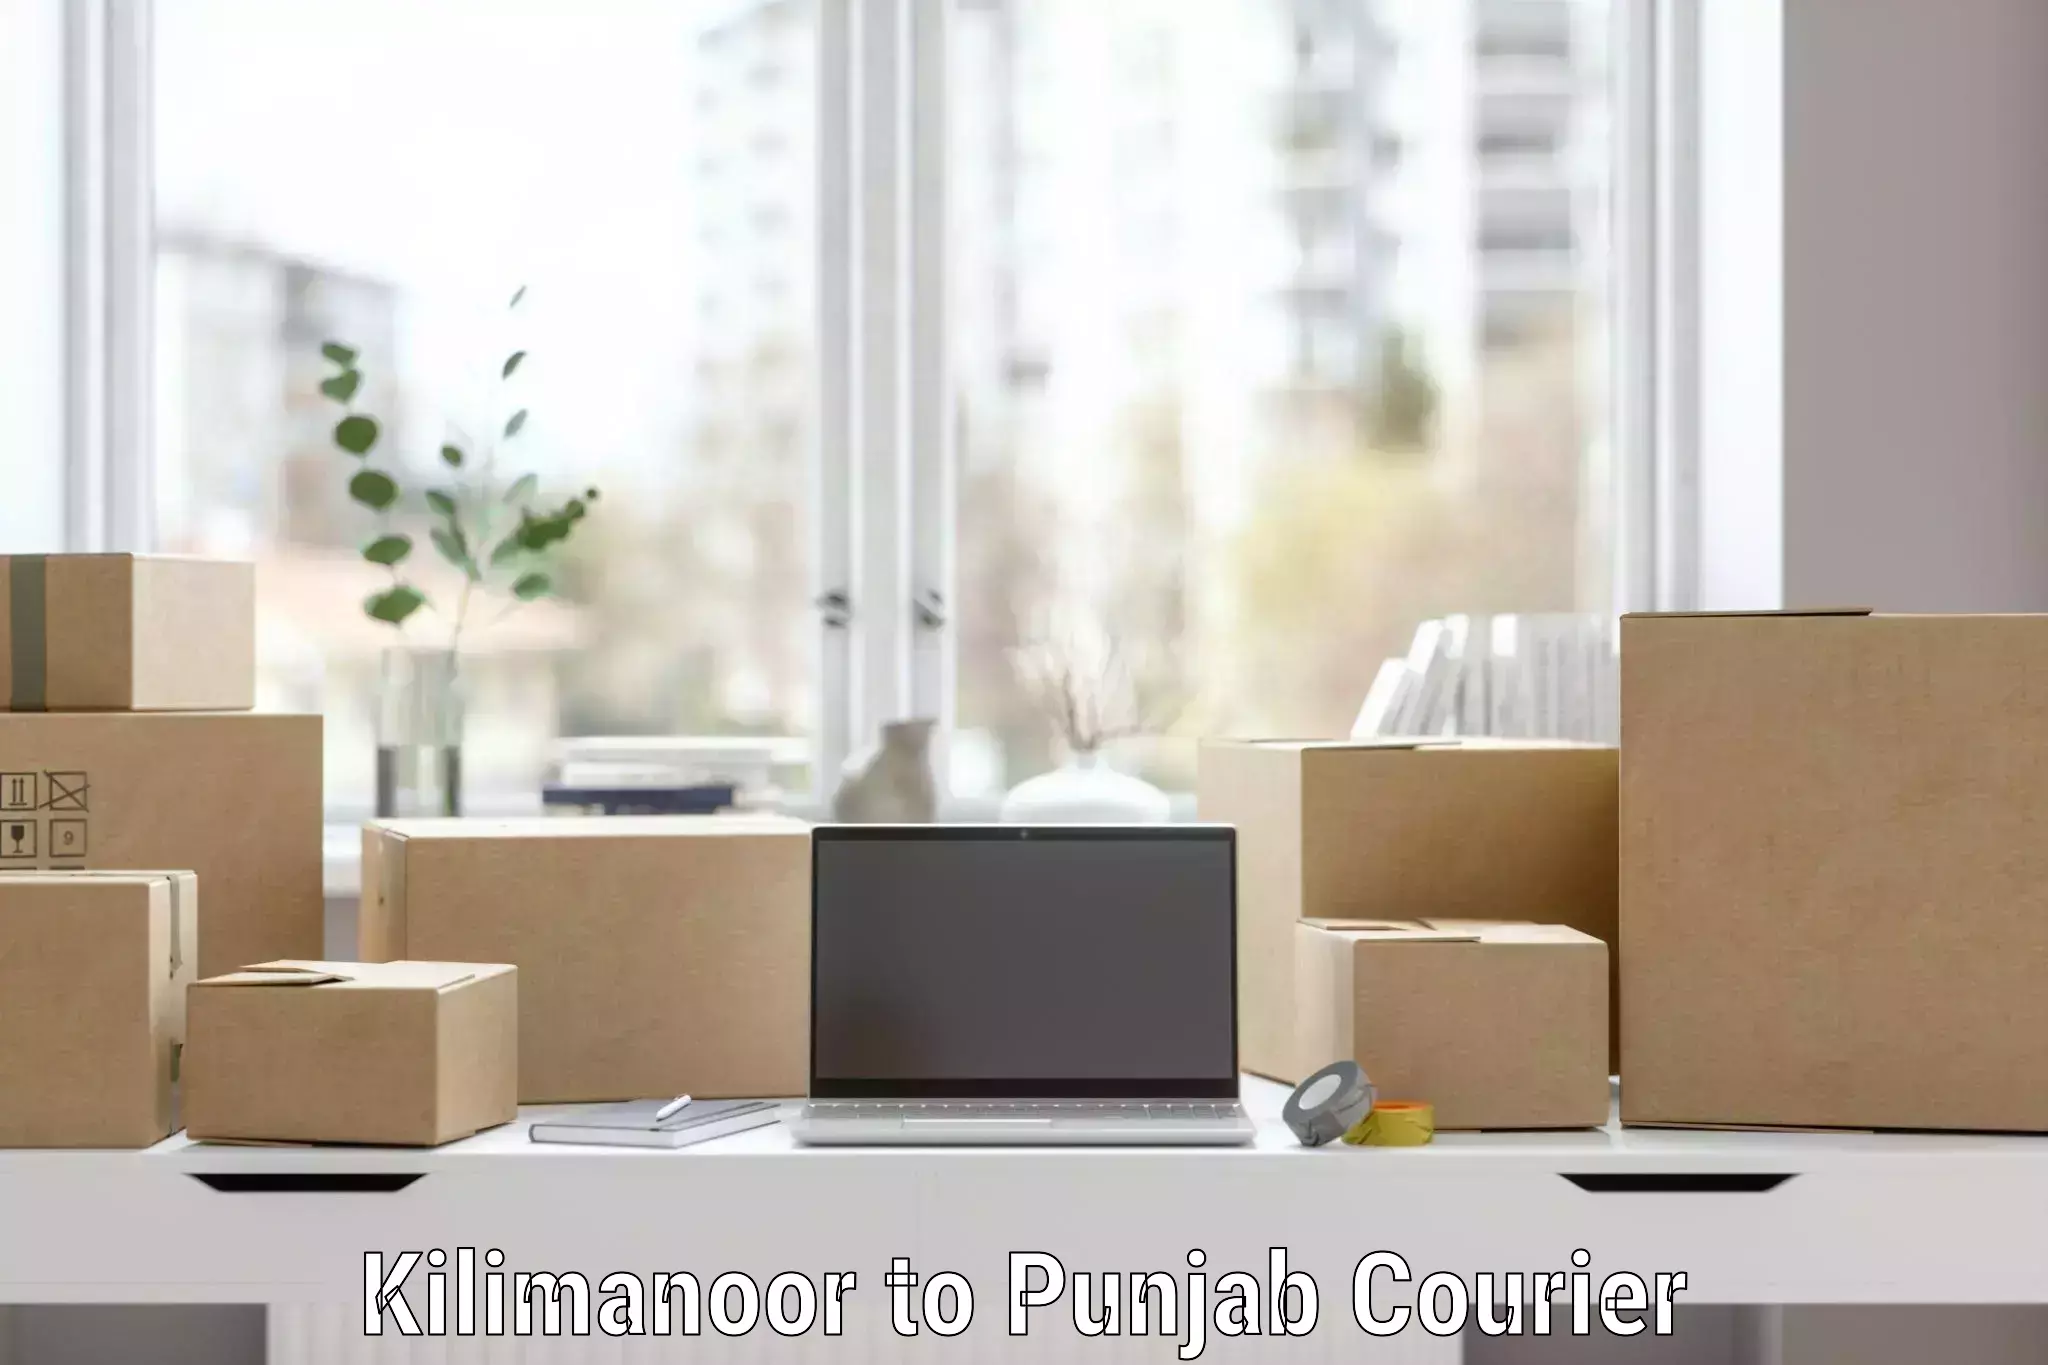 Trusted relocation experts Kilimanoor to Ludhiana